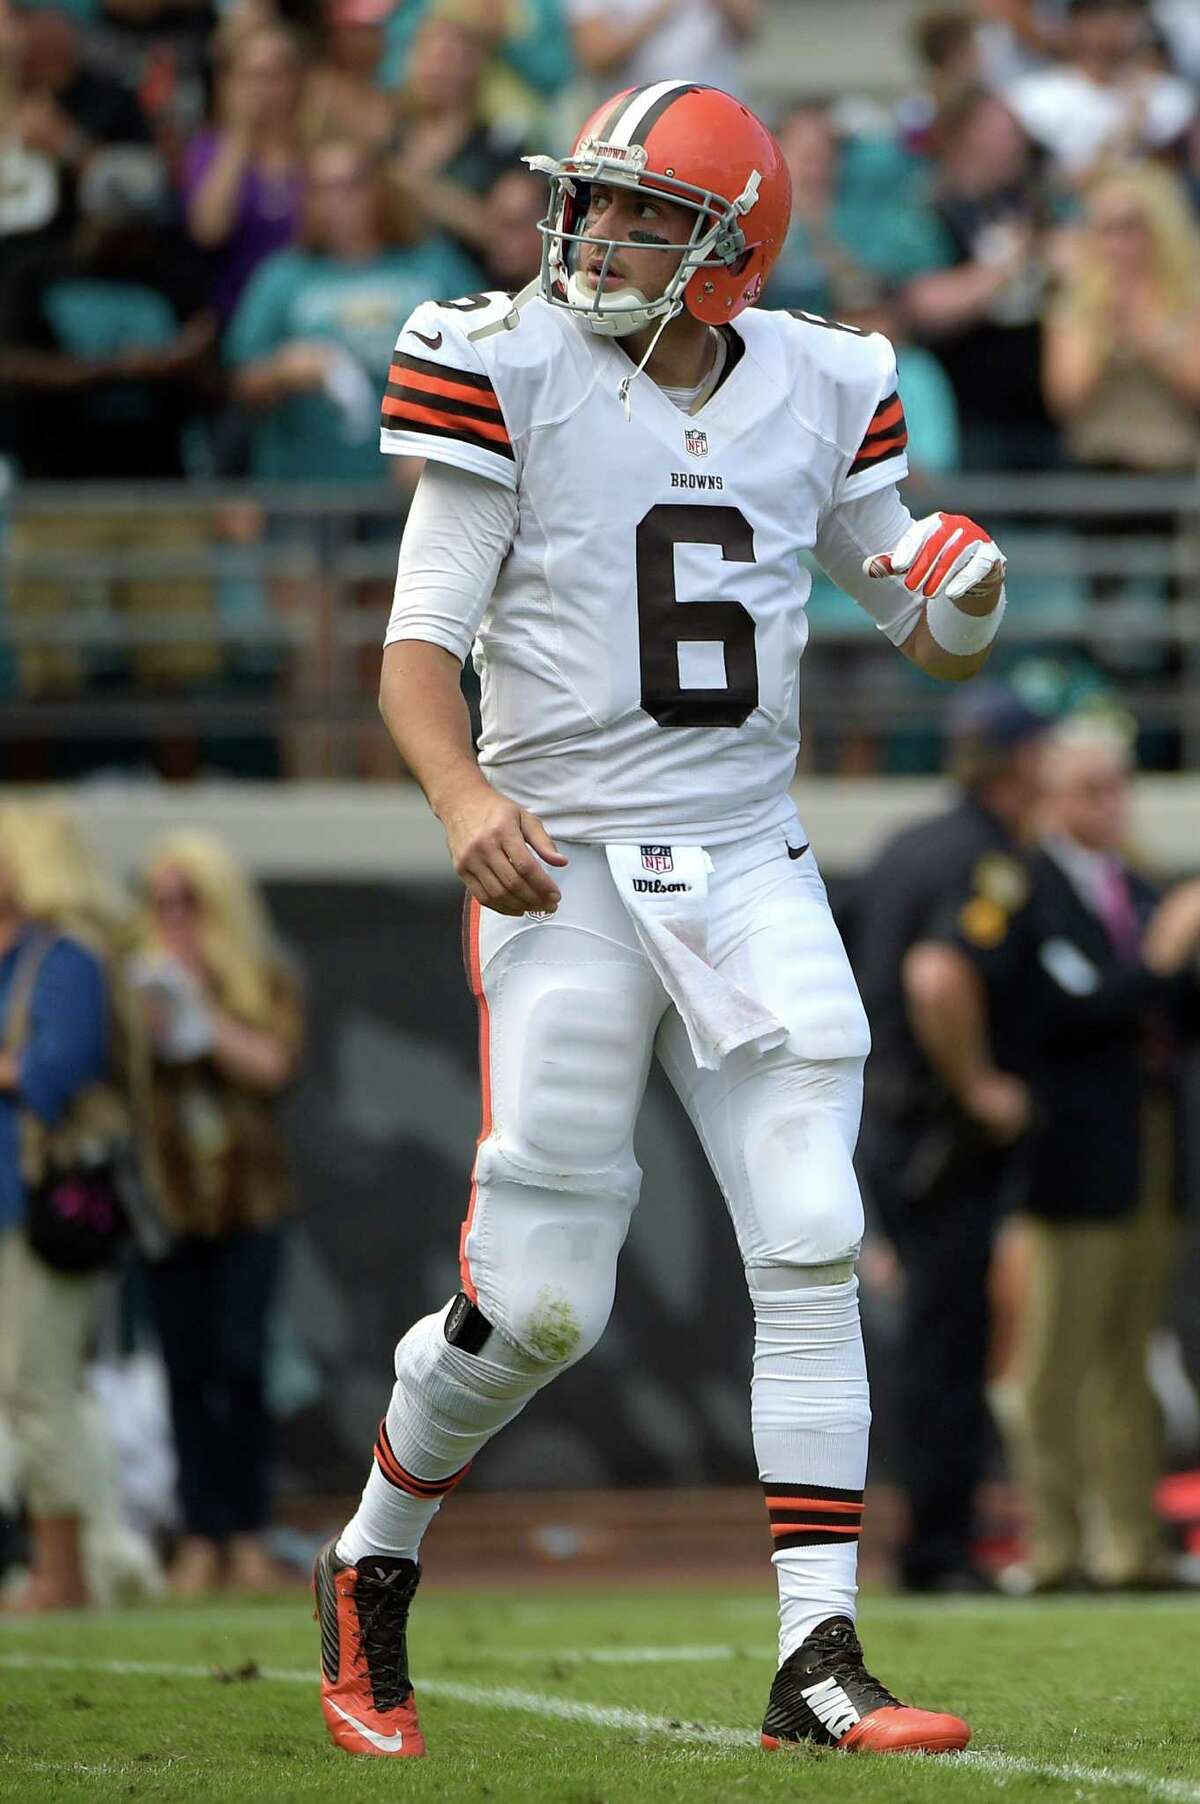 Cleveland Browns quarterback Brian Hoyer (6) looks back after throwing an interception to Jacksonville Jaguars outside linebacker Telvin Smith during the second half of an NFL football game in Jacksonville, Fla., Sunday, Oct. 19, 2014.(AP Photo/Phelan M. Ebenhack)